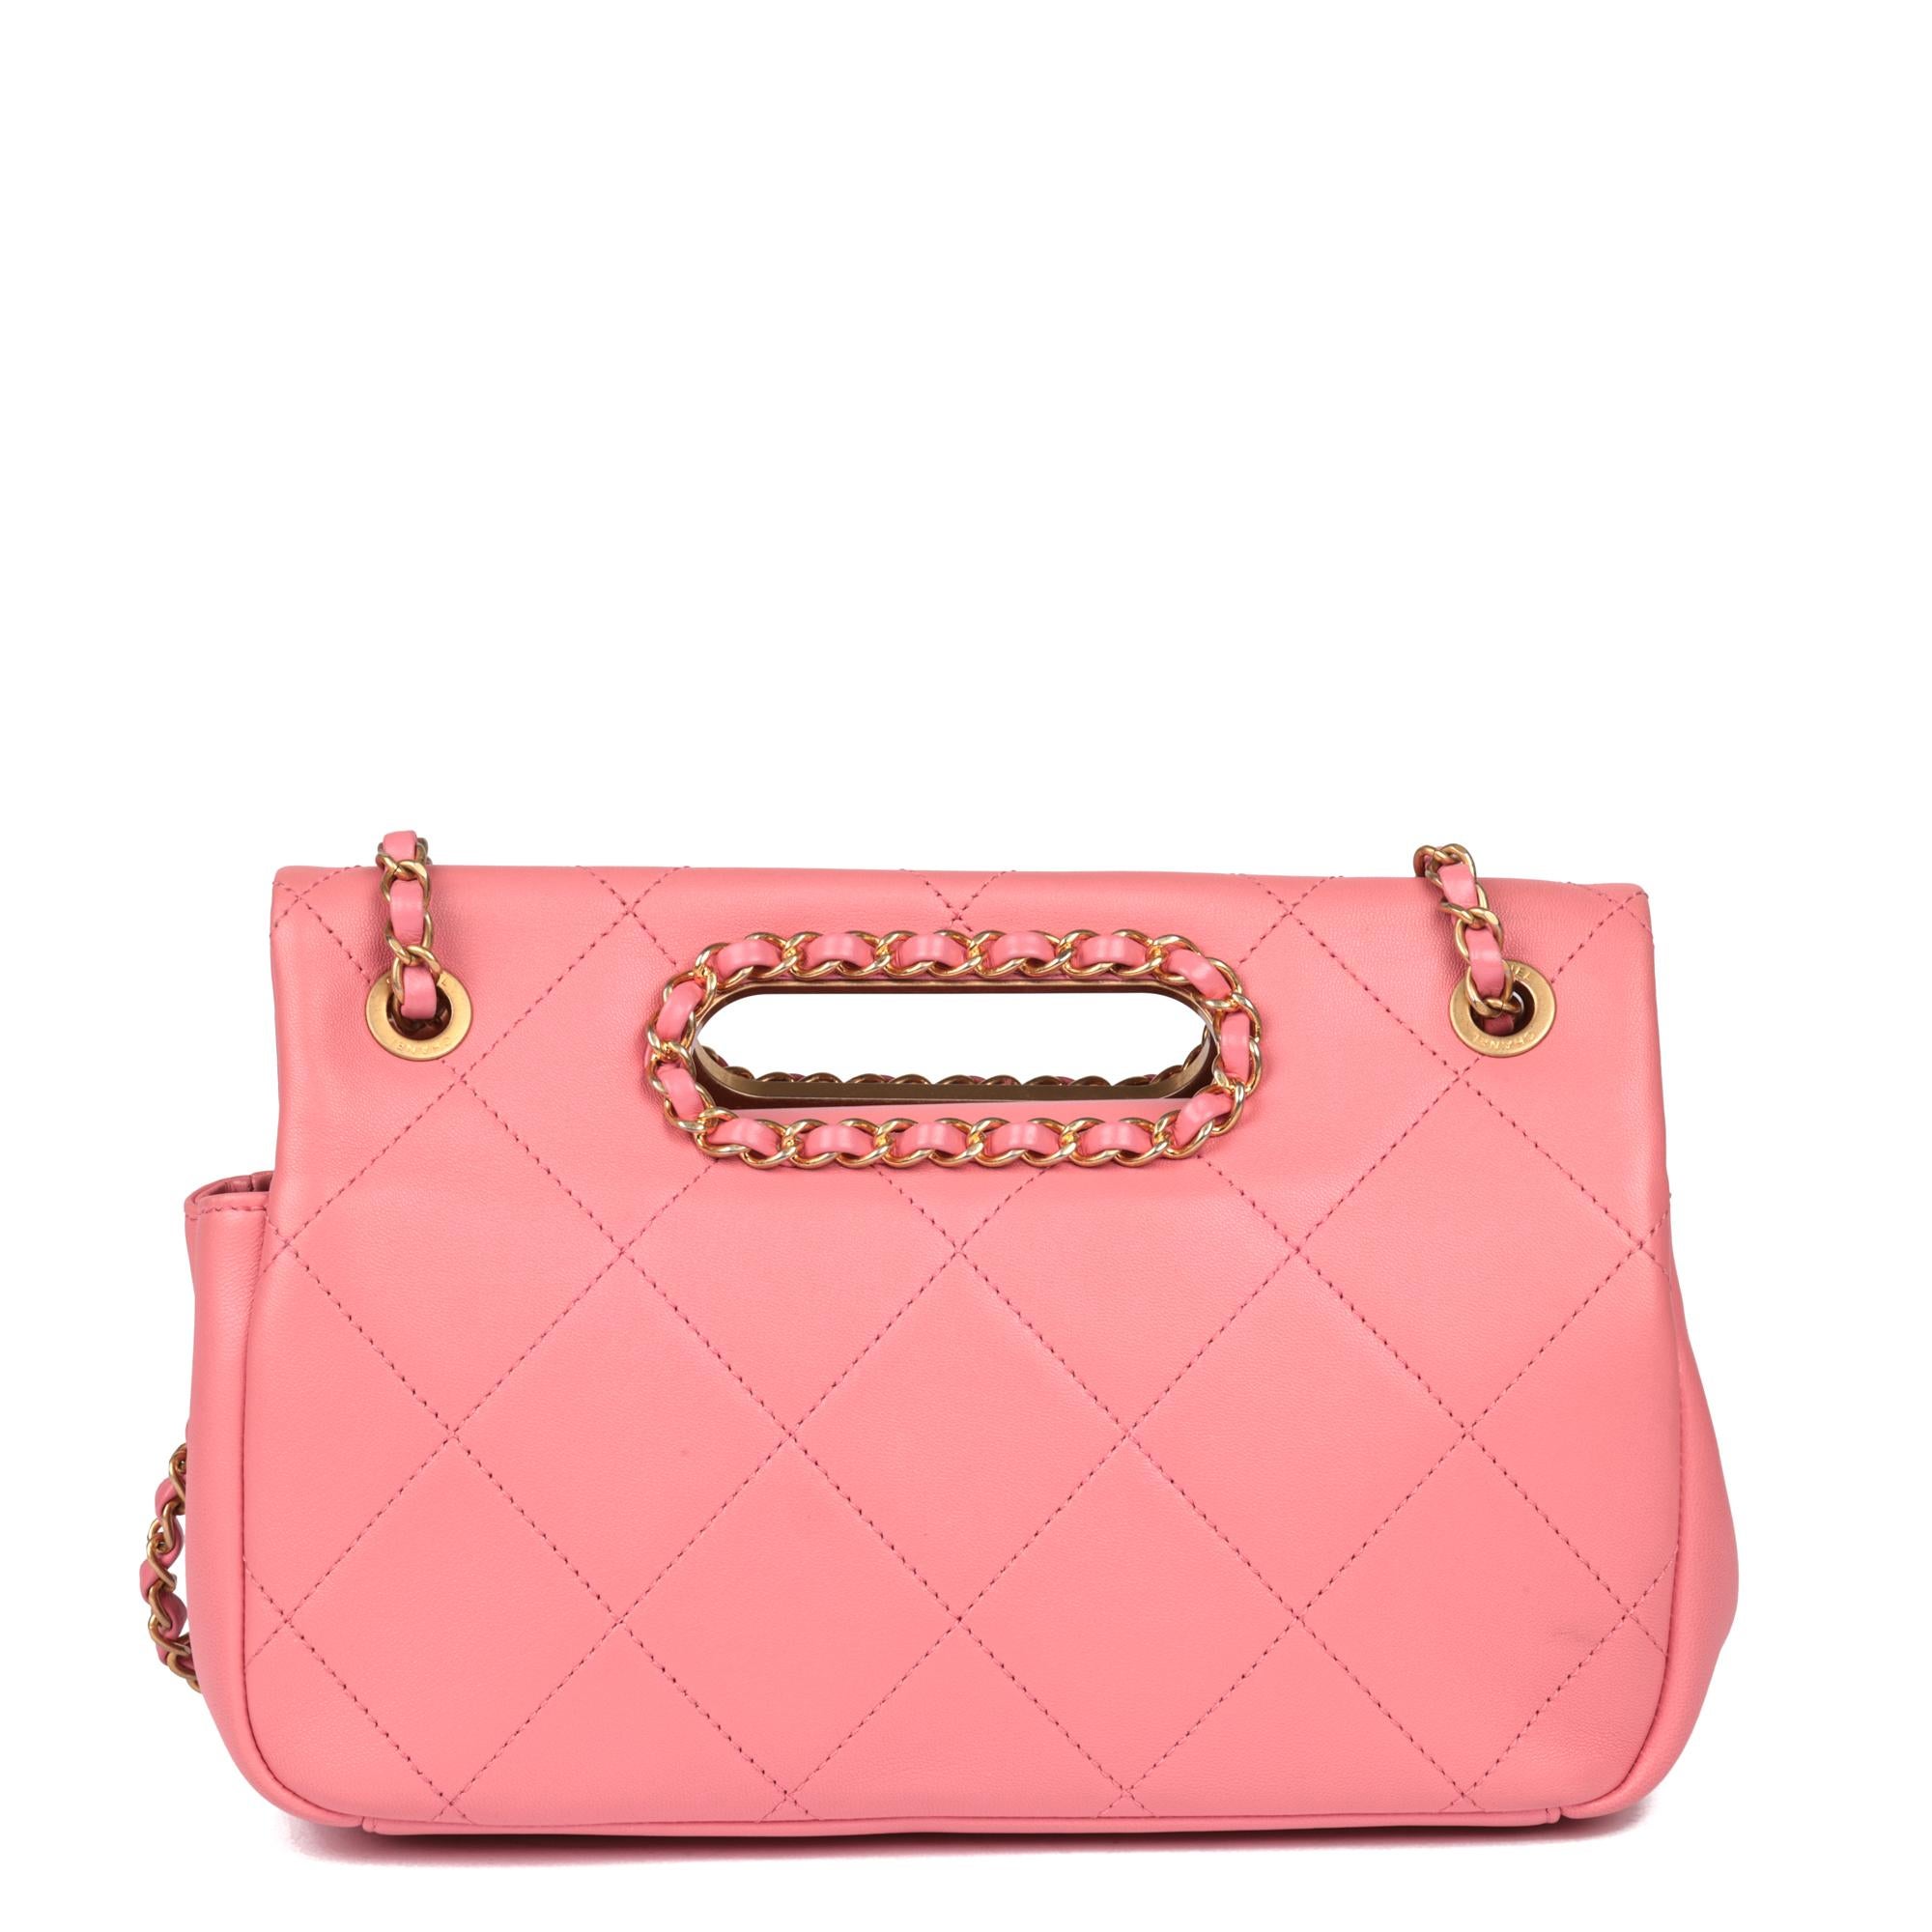 CHANEL Pink Quilted Lambskin A Real Catch Classic Flap Bag In Excellent Condition For Sale In Bishop's Stortford, Hertfordshire